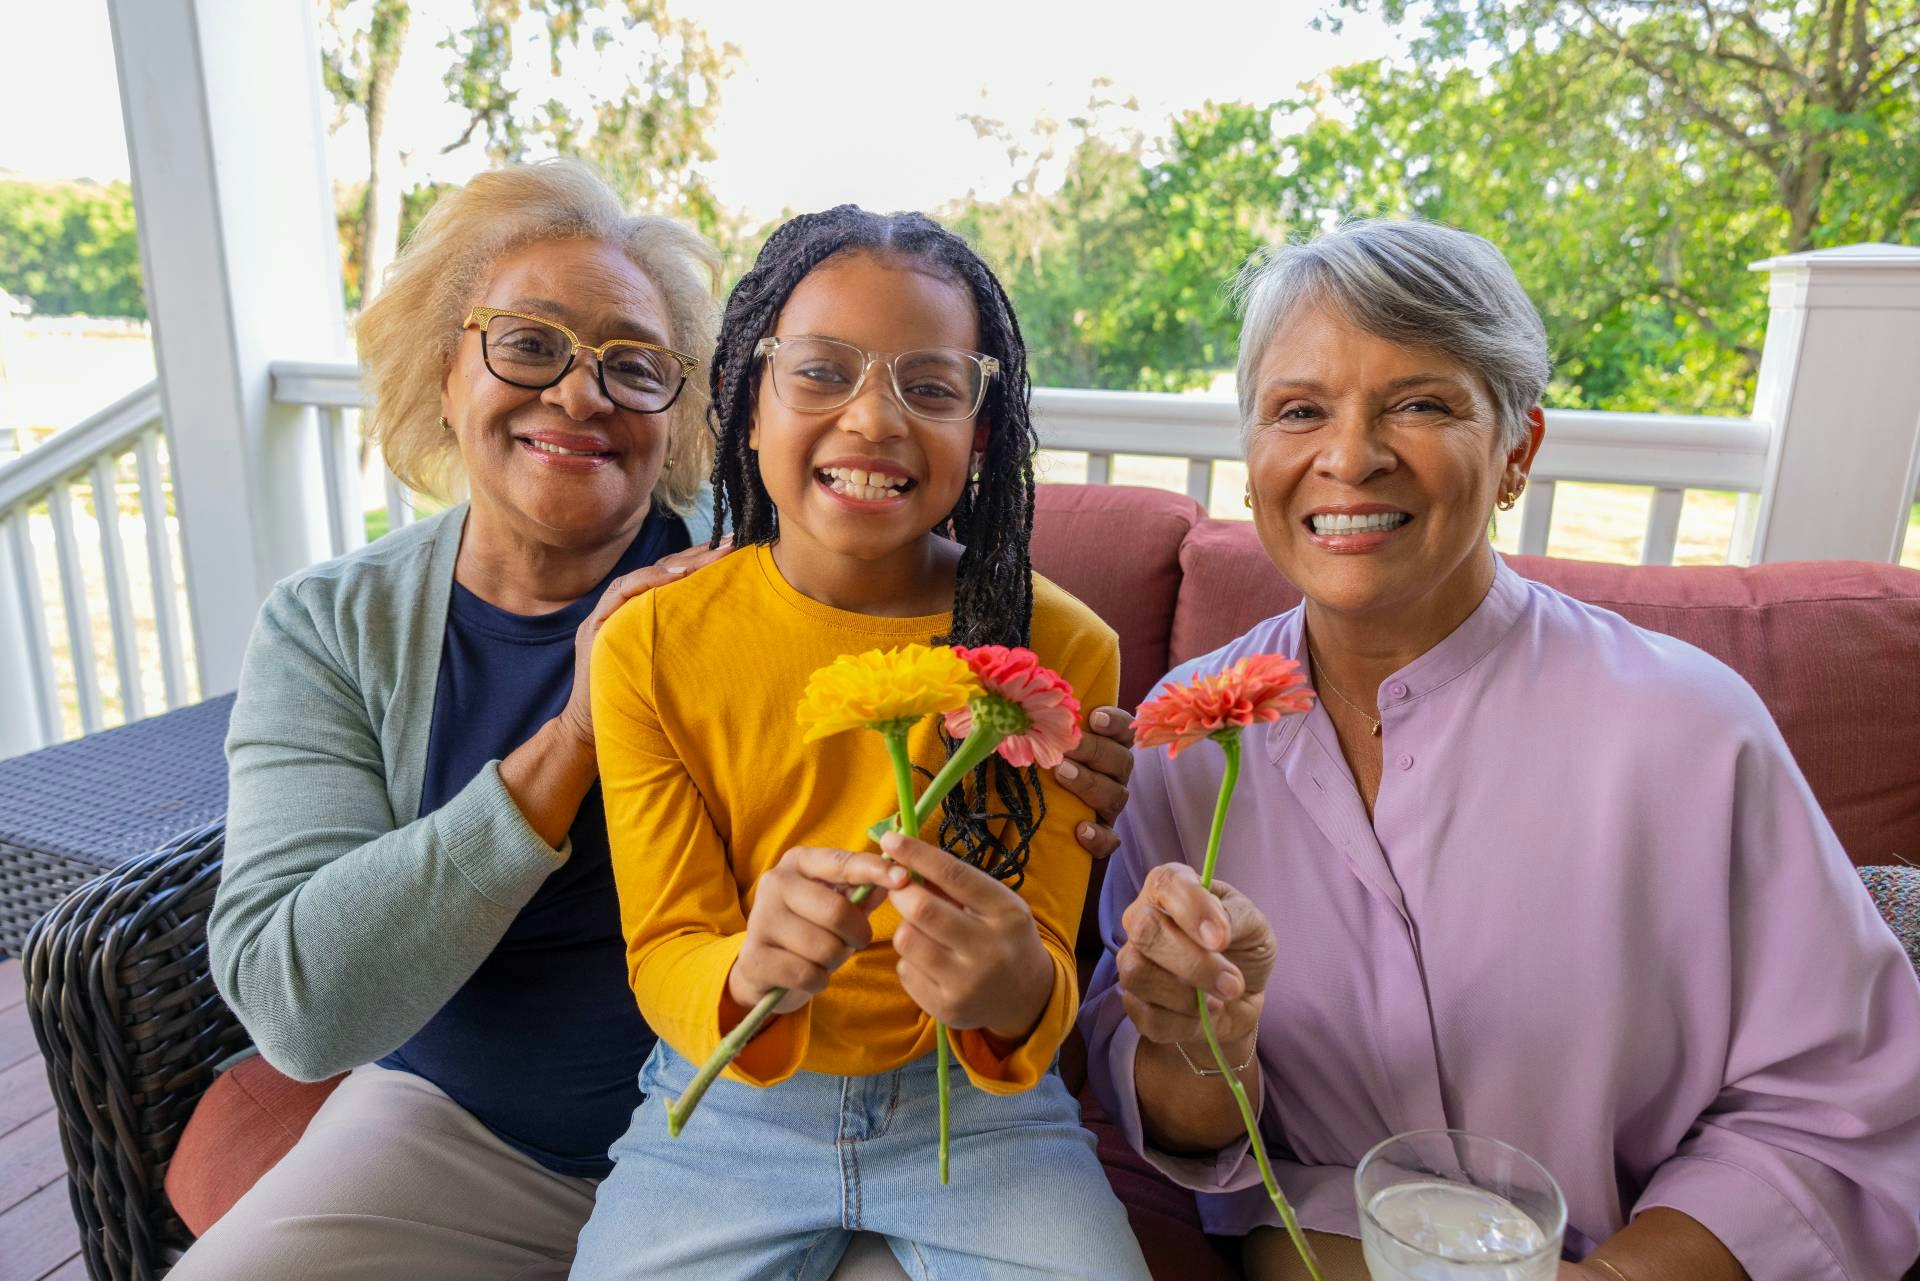 Two older women and a young girl sit on a bench on a porch. They smile at the camera